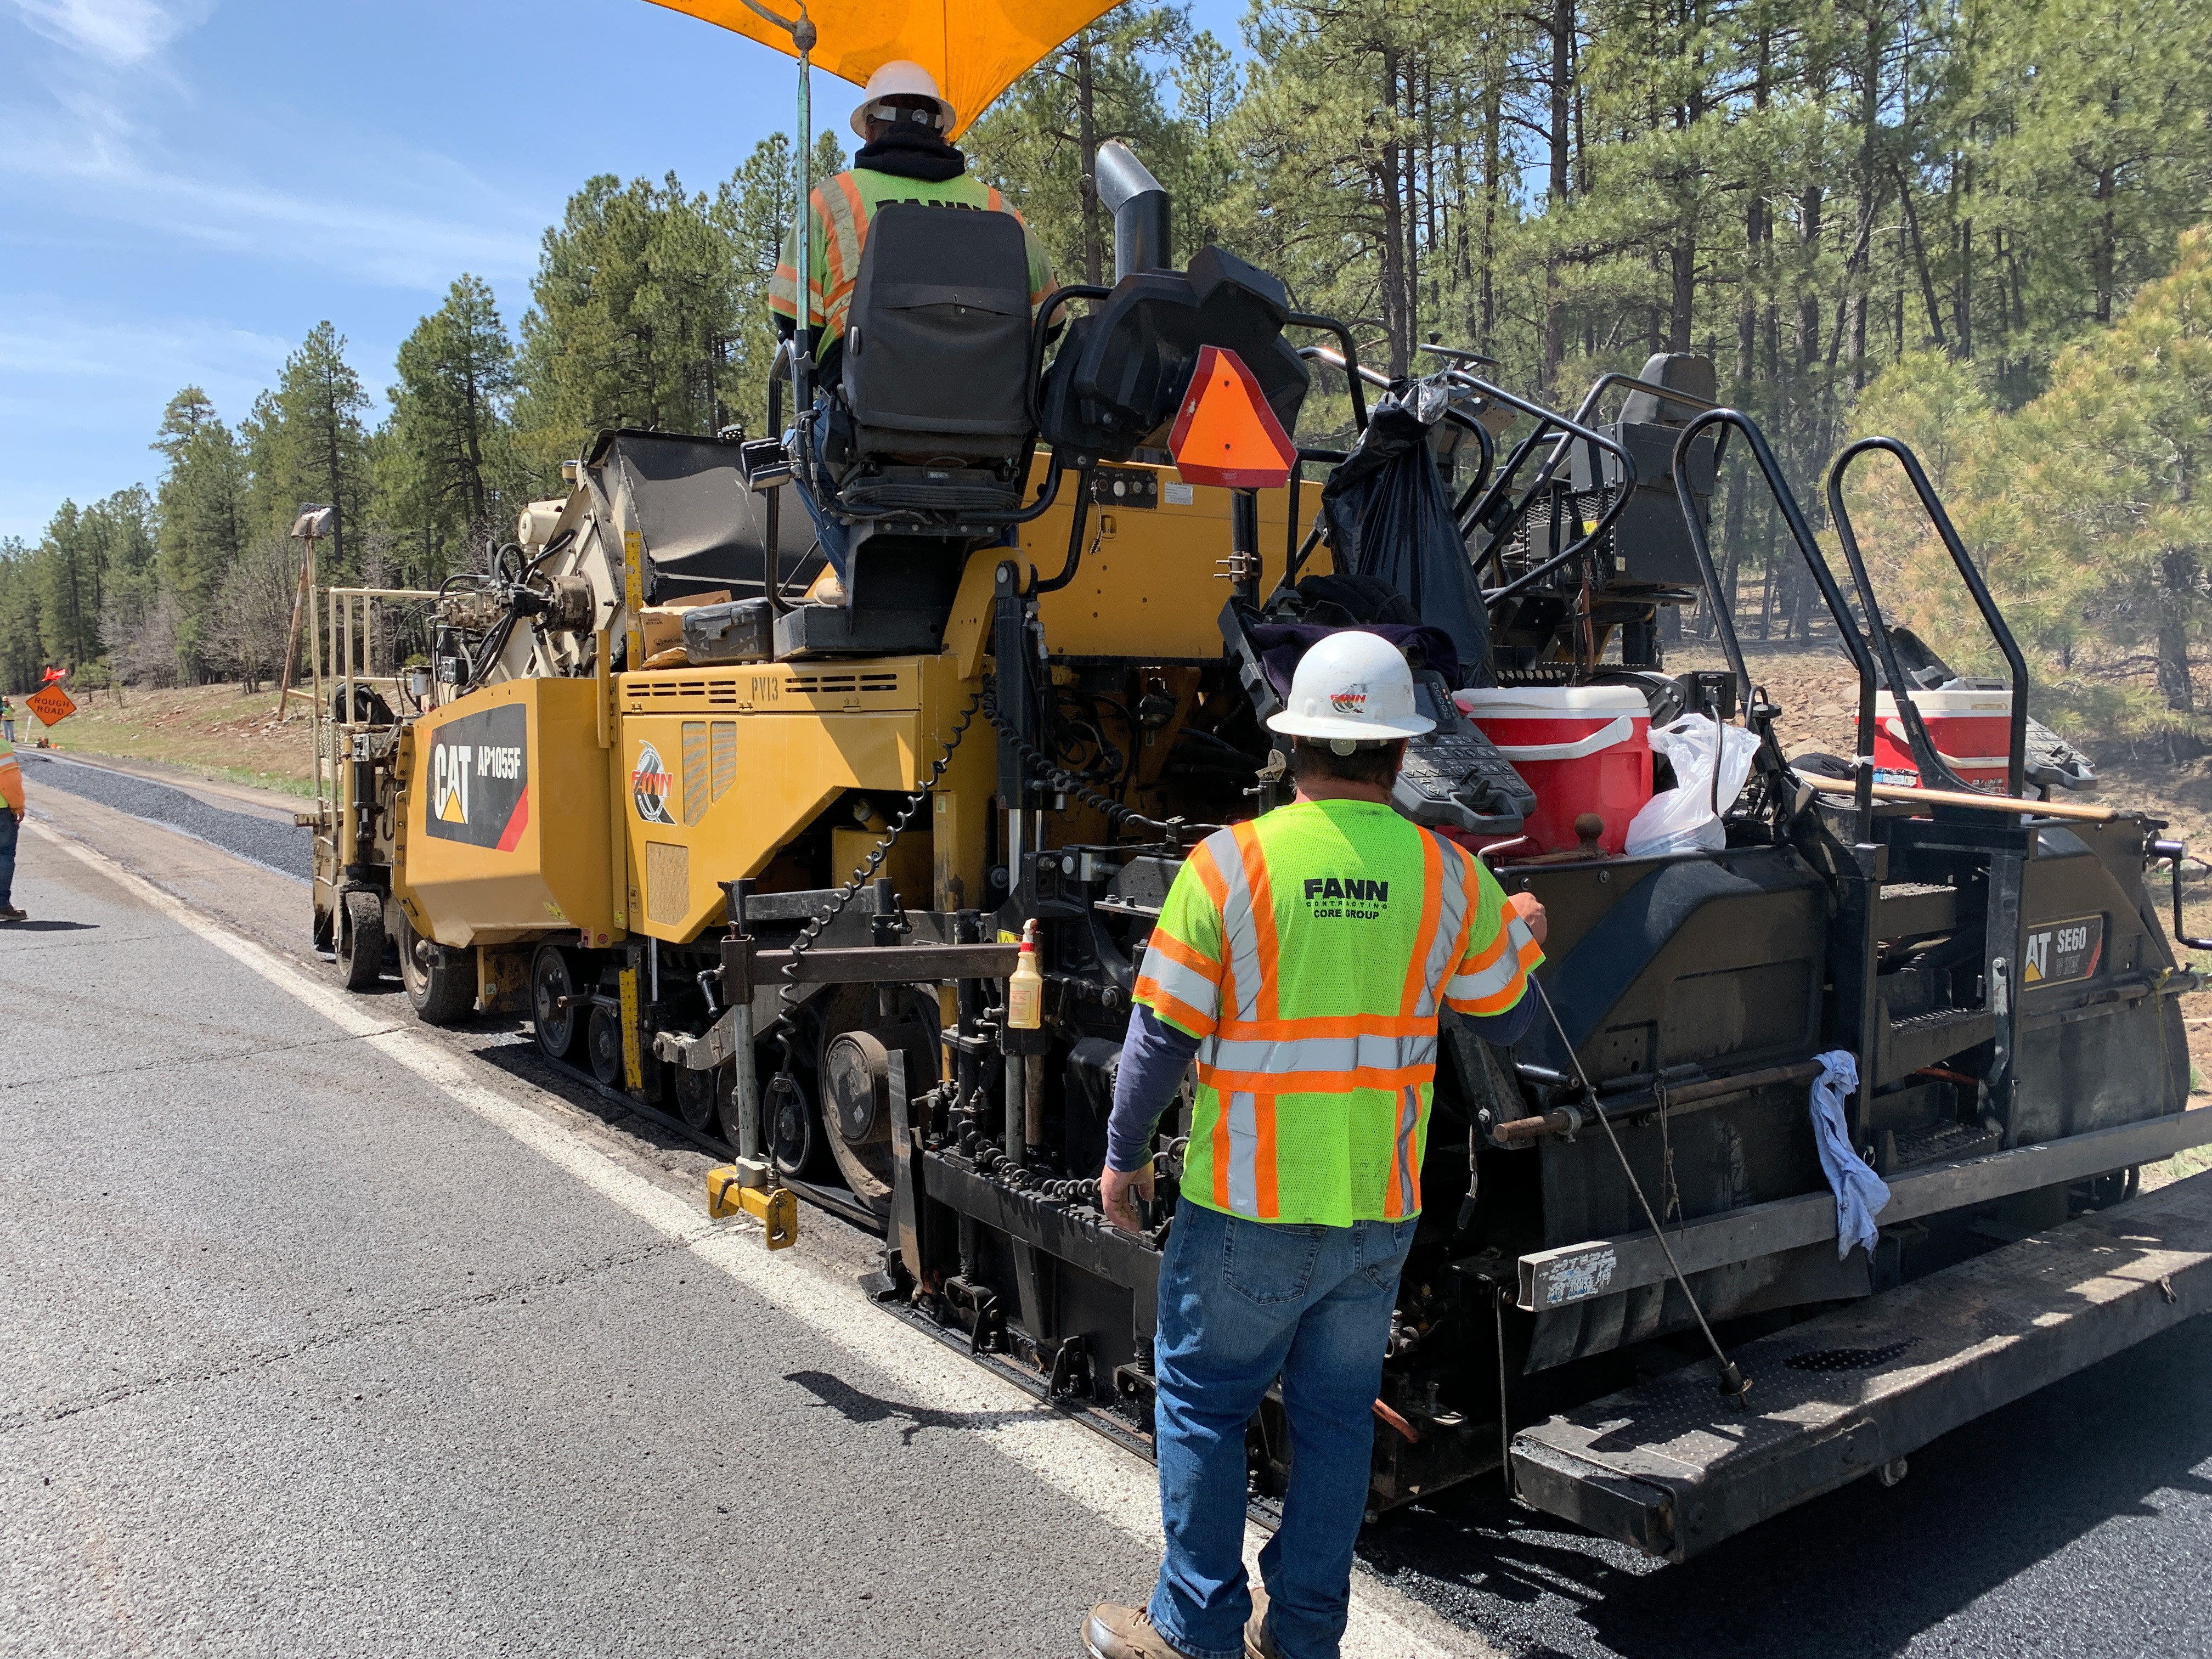 Heavy equipment repairs and replaces pavement on a stretch of highway.